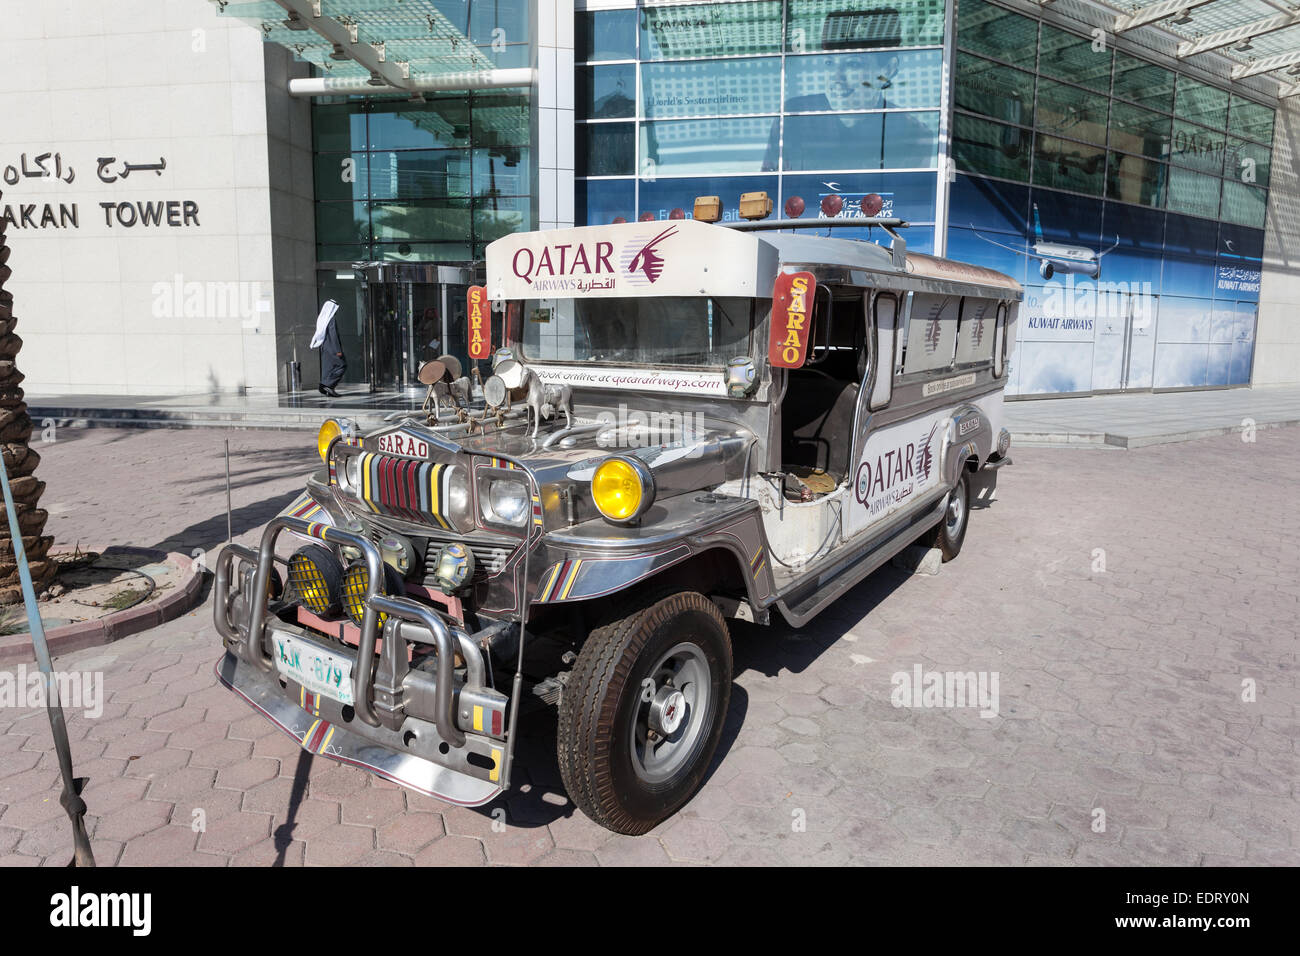 Sarao Motors jeepney car from Qatar Airways in the city of Kuwait. December 8, 2014 in Kuwait, Middle East Stock Photo